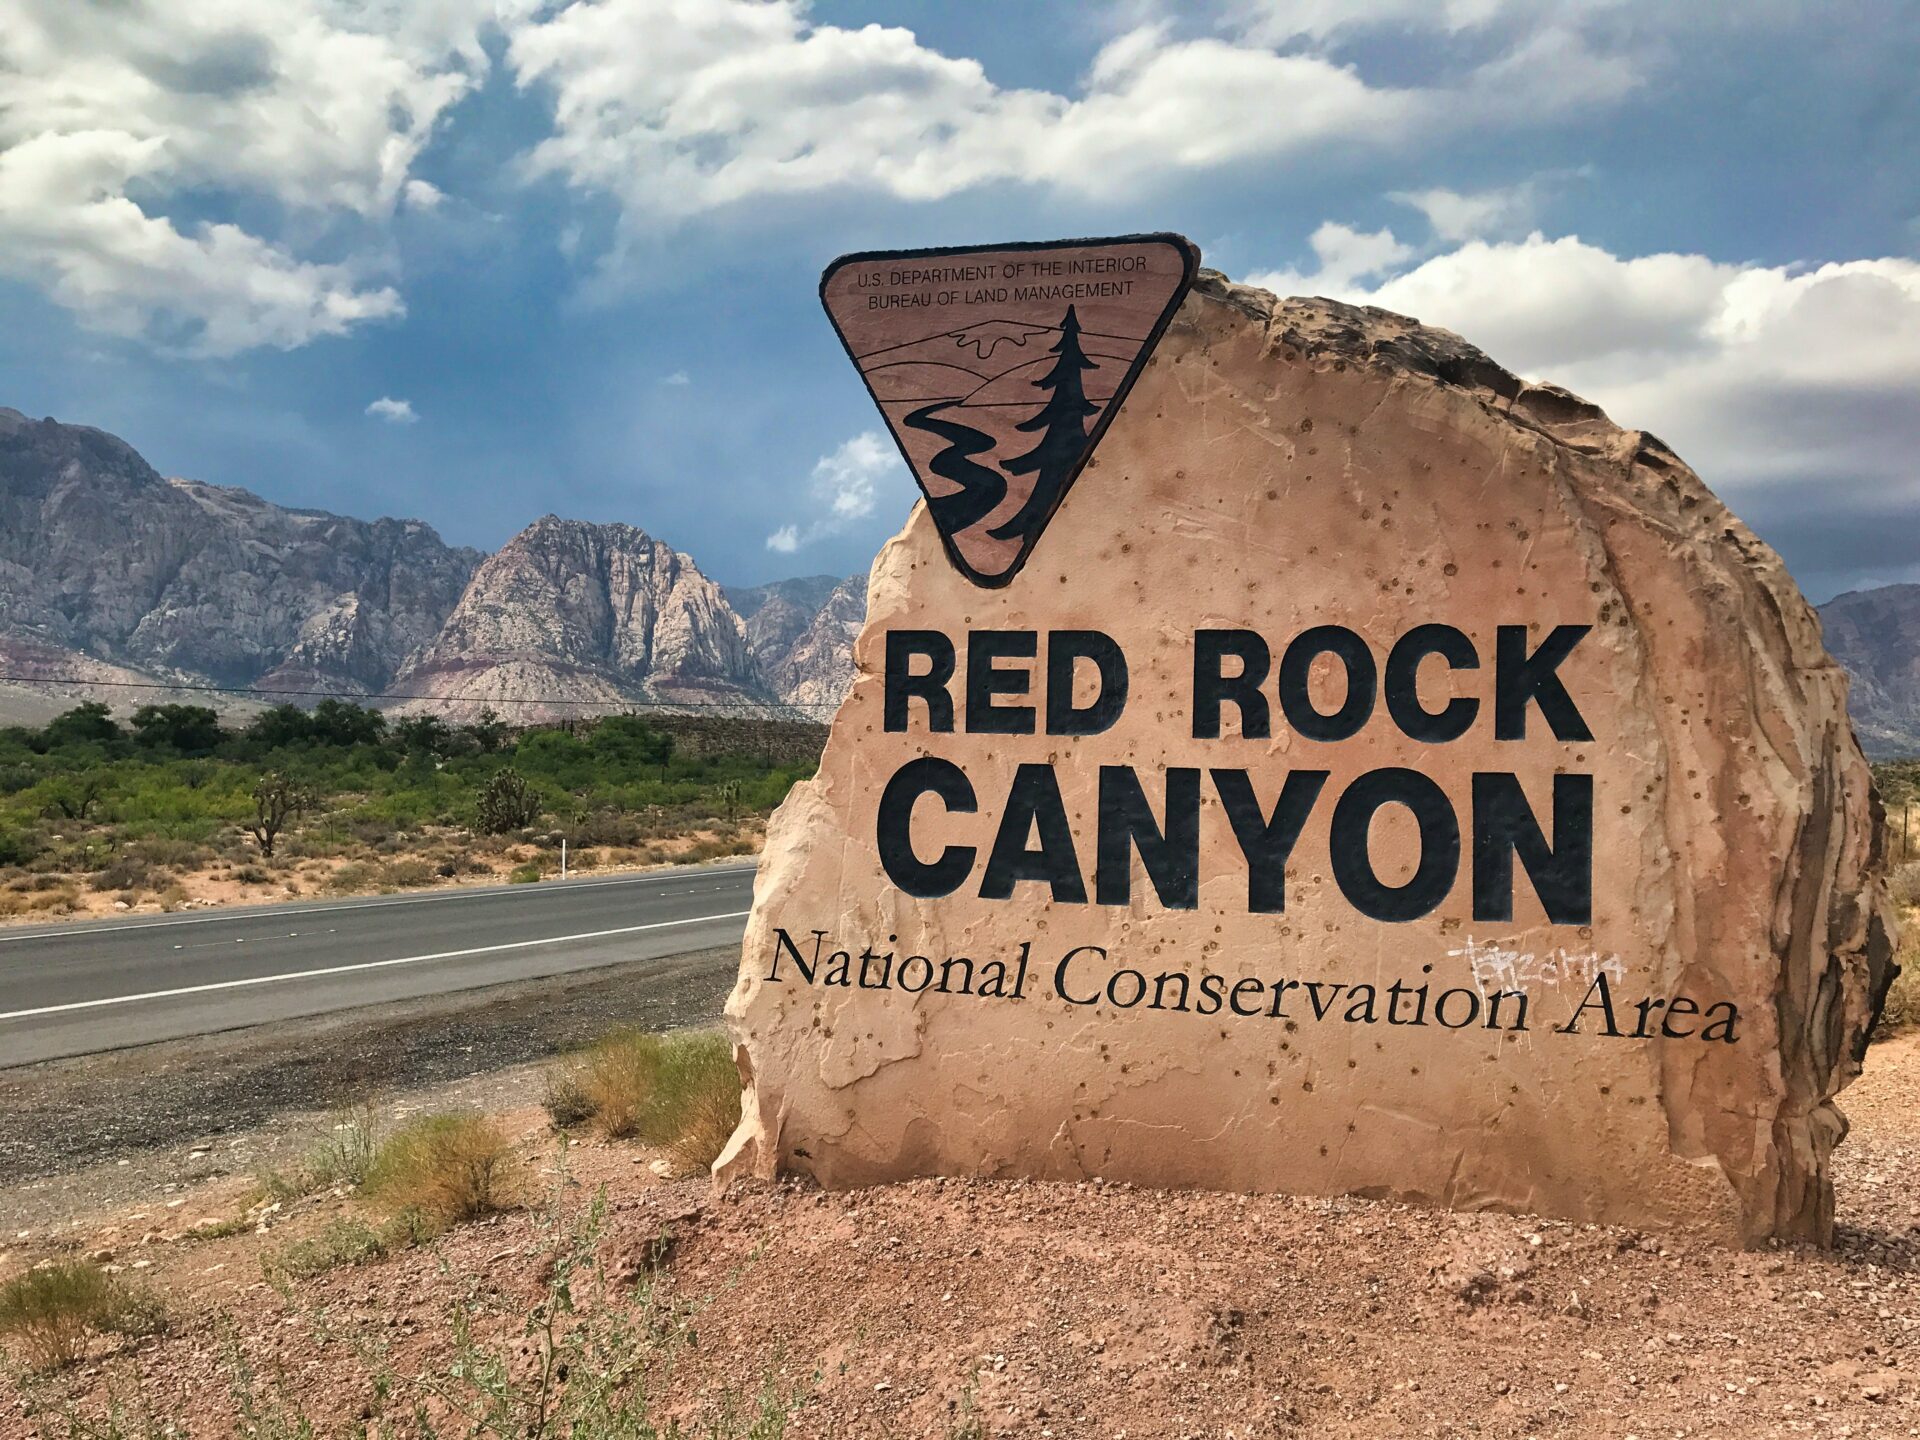 Red rock canyon national conservation area.